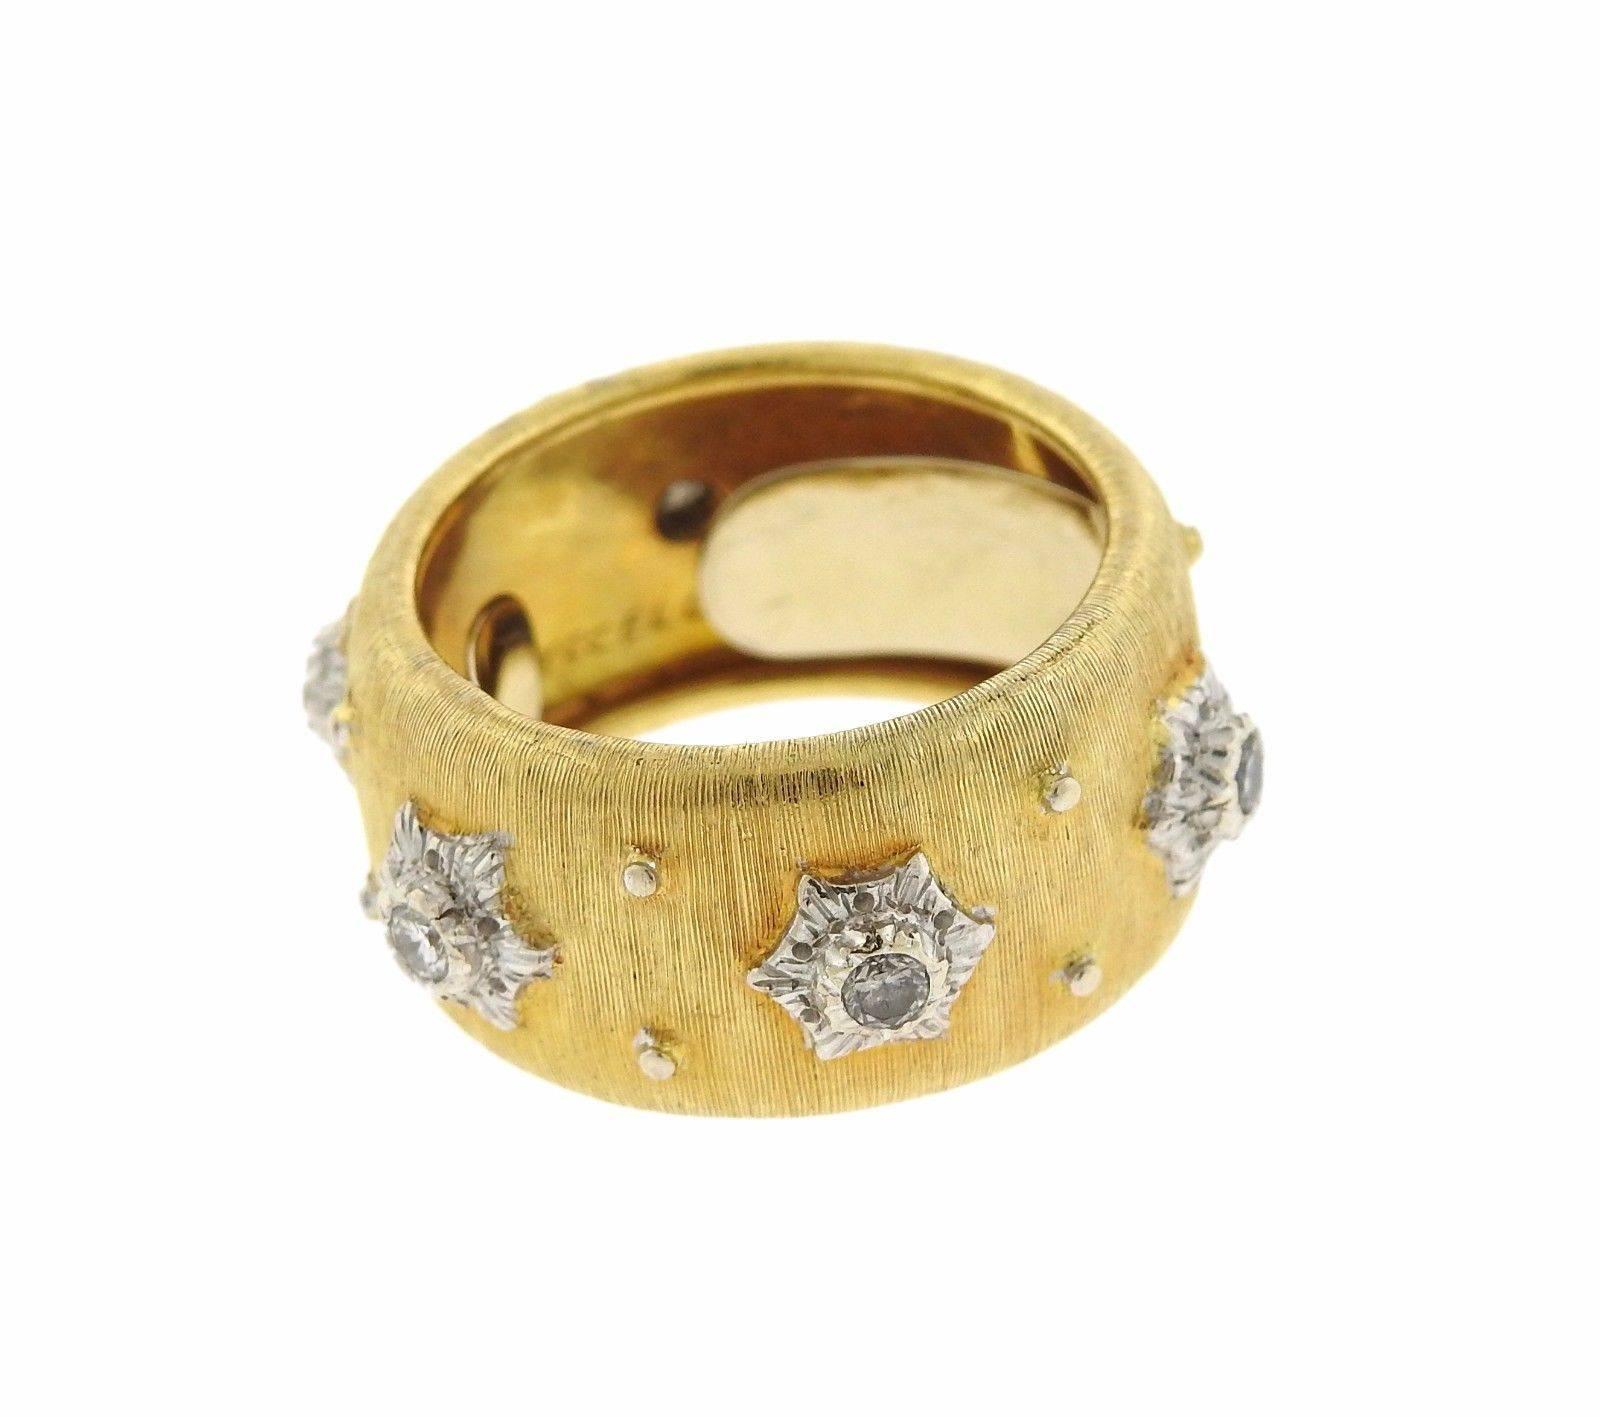 An 18k yellow and white gold band ring set with 0.18ctw of VS-SI/H-I diamonds.  The ring is a size 6.5 and is 11mm wide.  The weight of the piece is 10.9 grams.  Marked: Buccellati 18k.